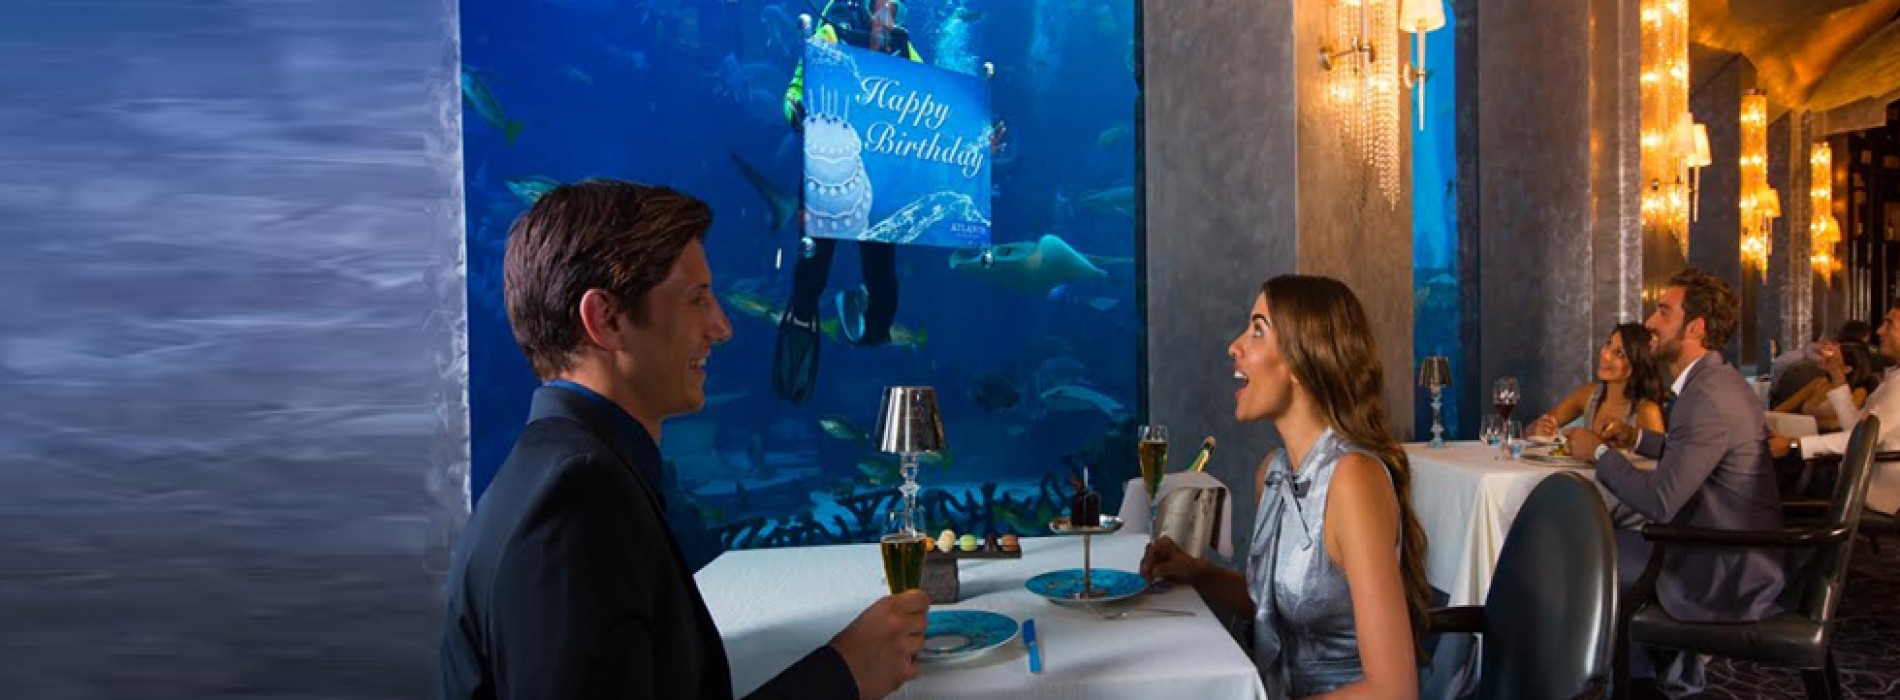 Celebrate this Valentine’s Day at Atlantis, The Palm